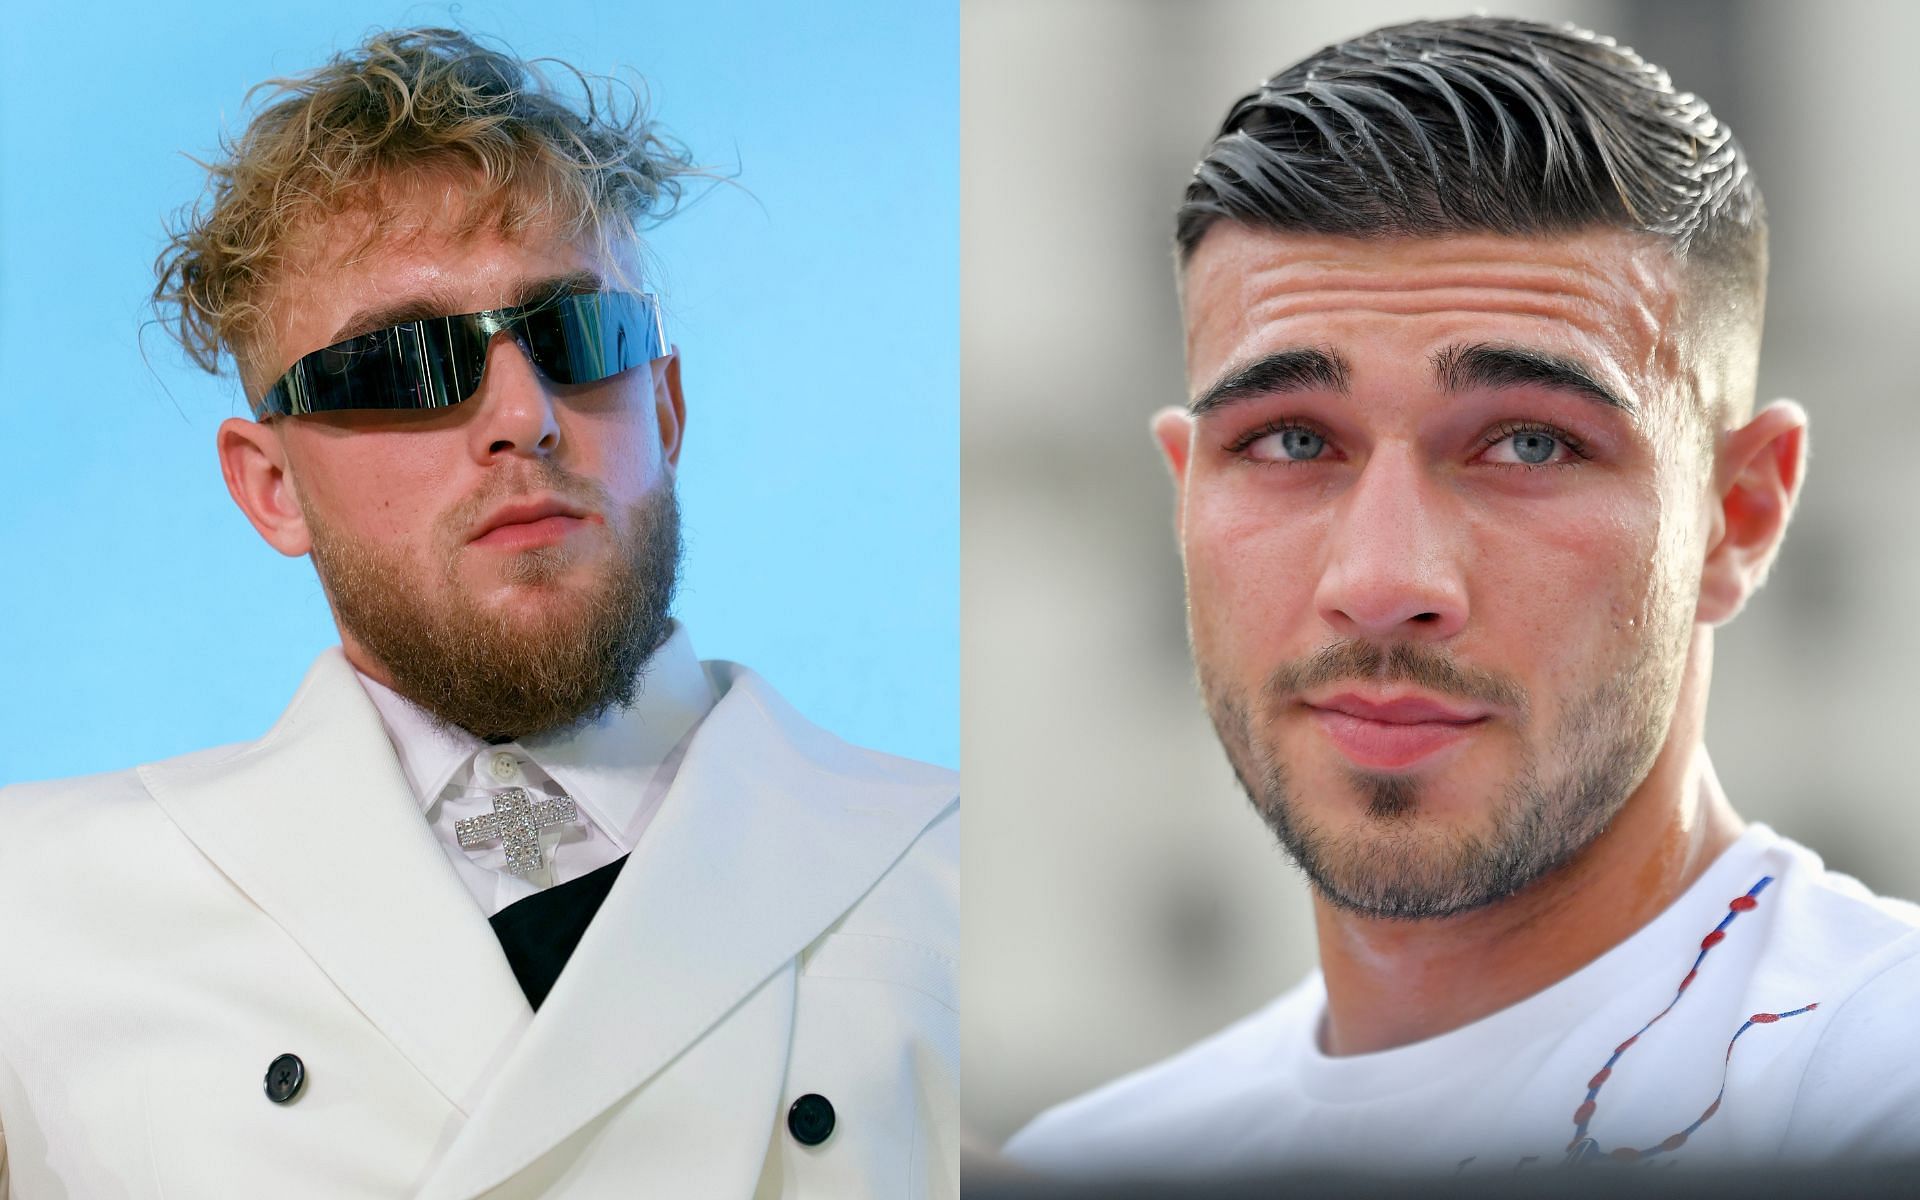 Boxing rivals Jake Paul (left) and Tommy Fury (right)